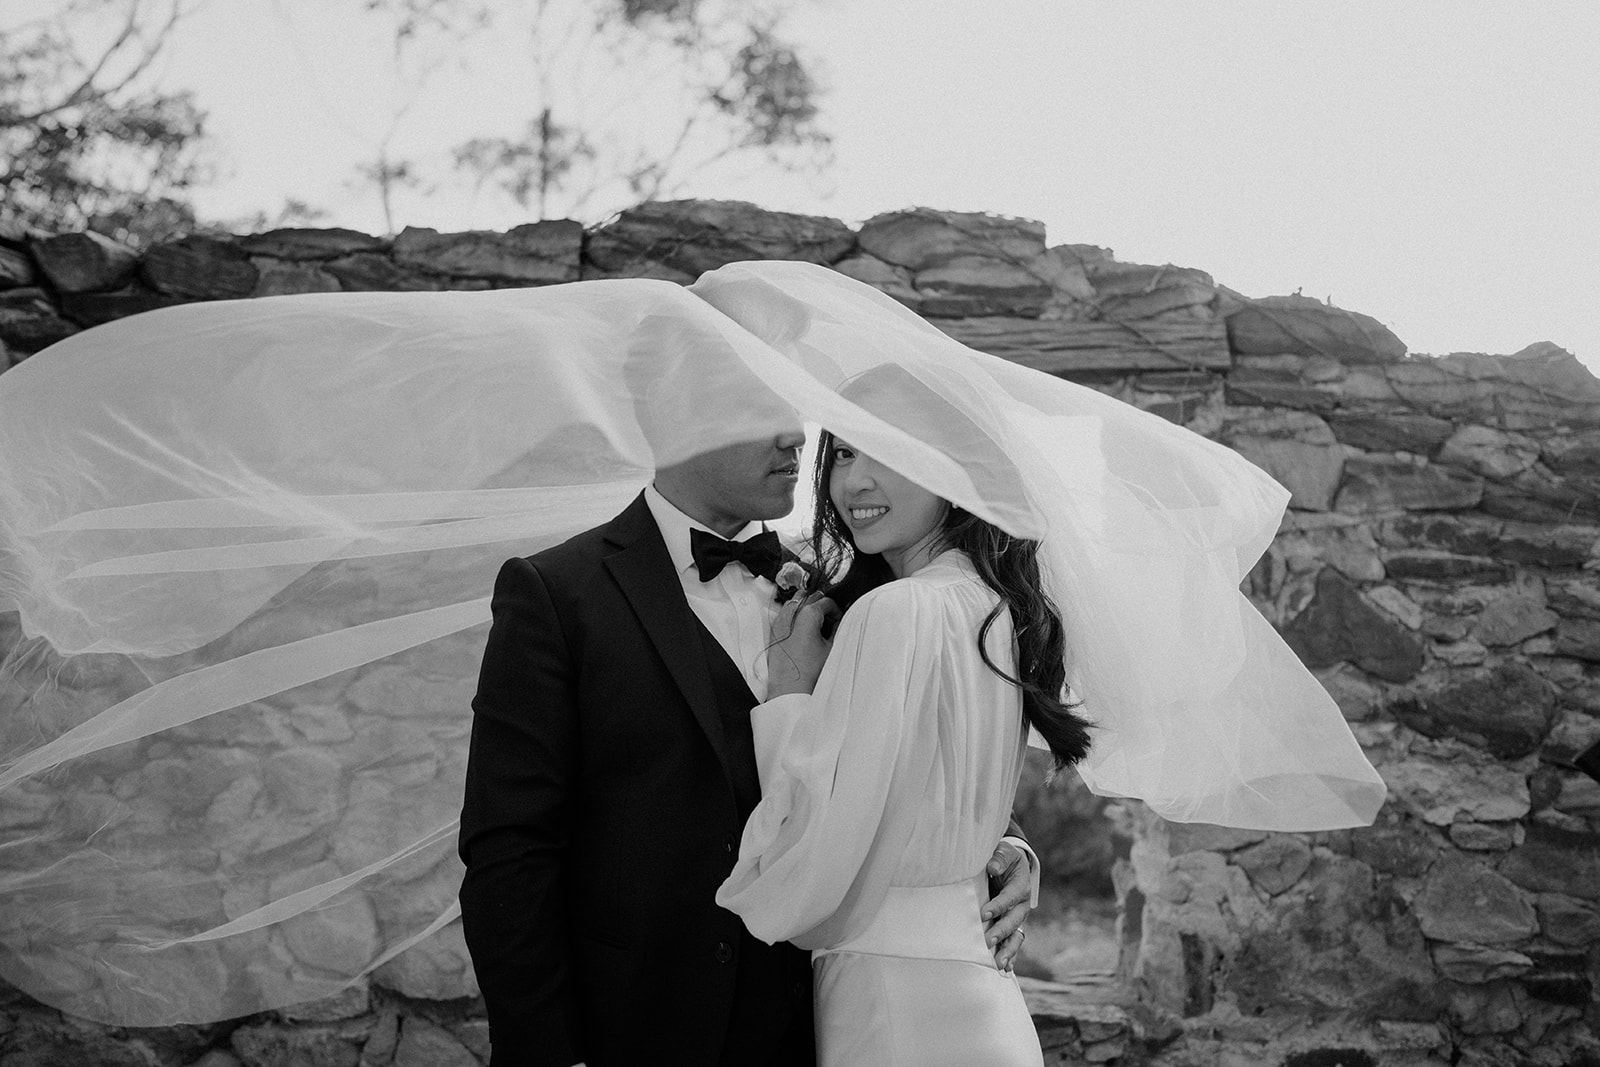 Bride and groom under a veil